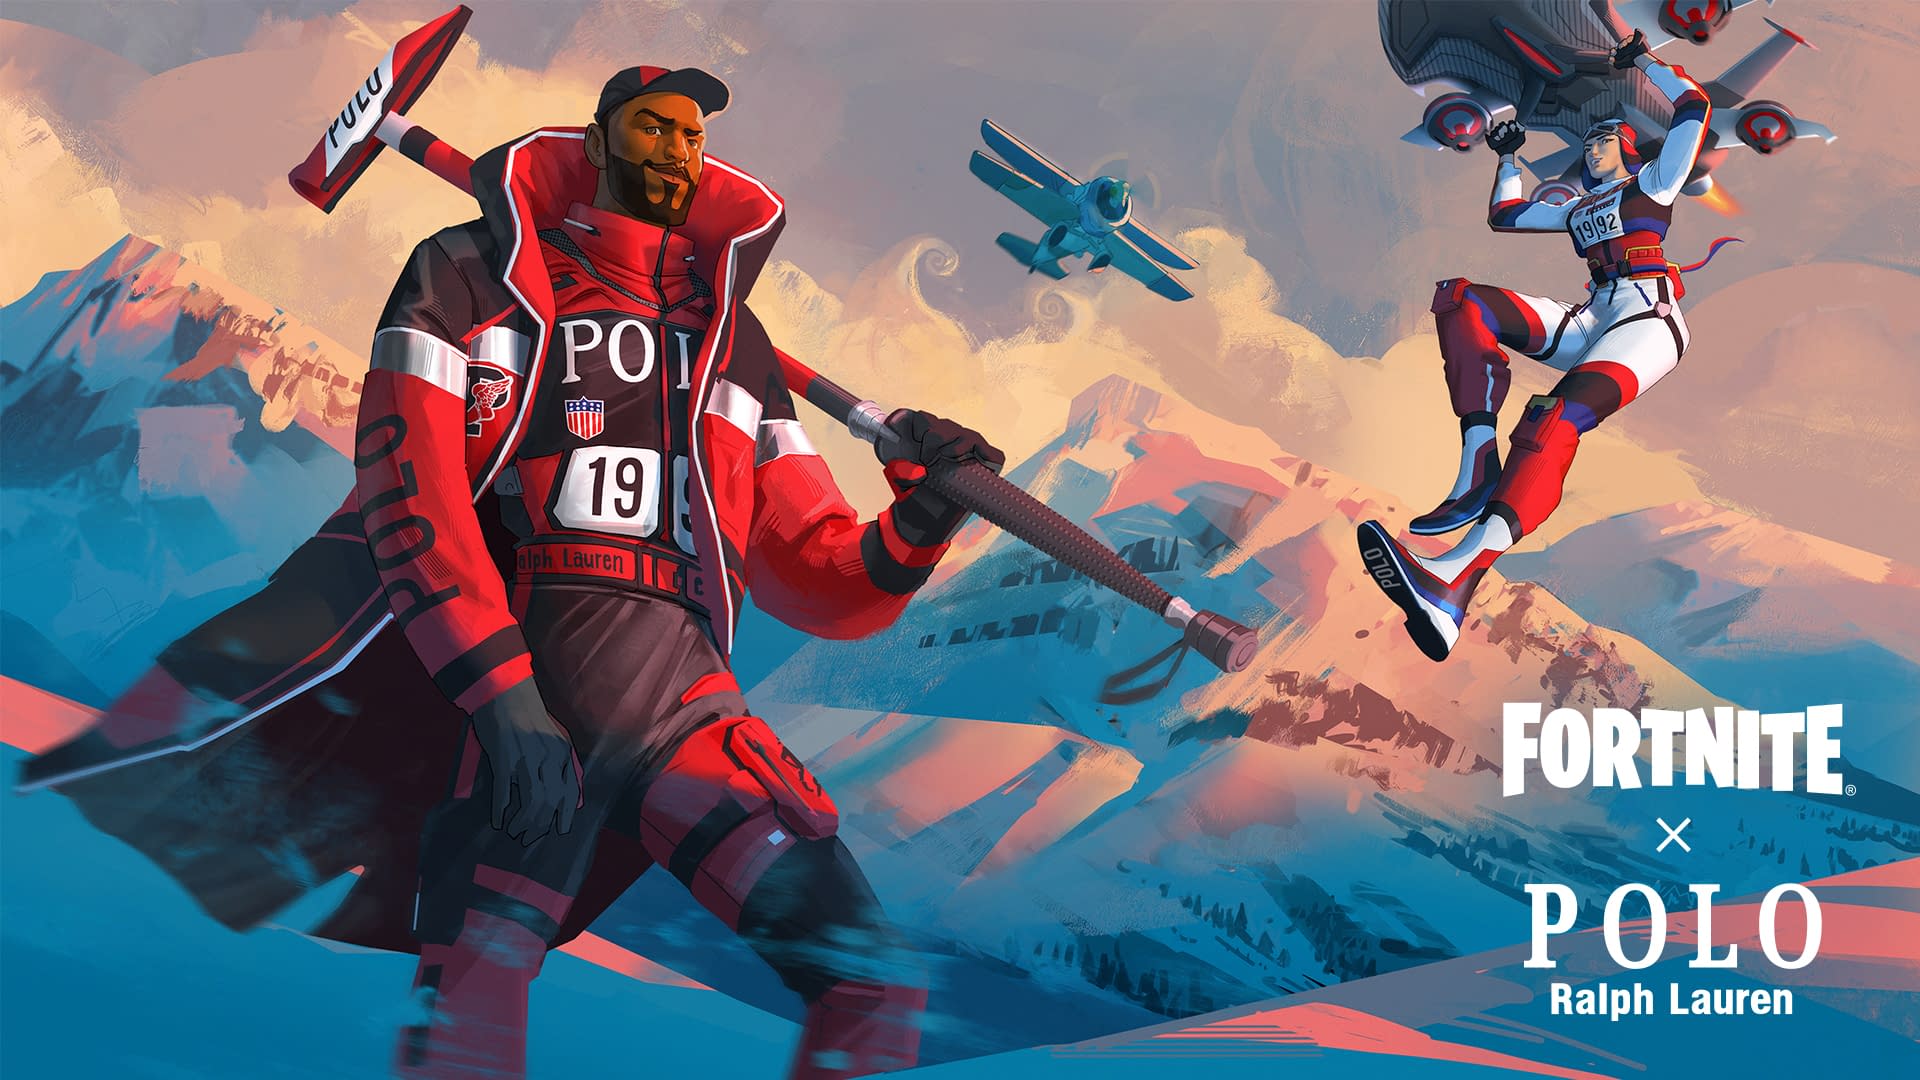 Polo G Helps Launch Ralph Lauren Fortnite Polo Collection